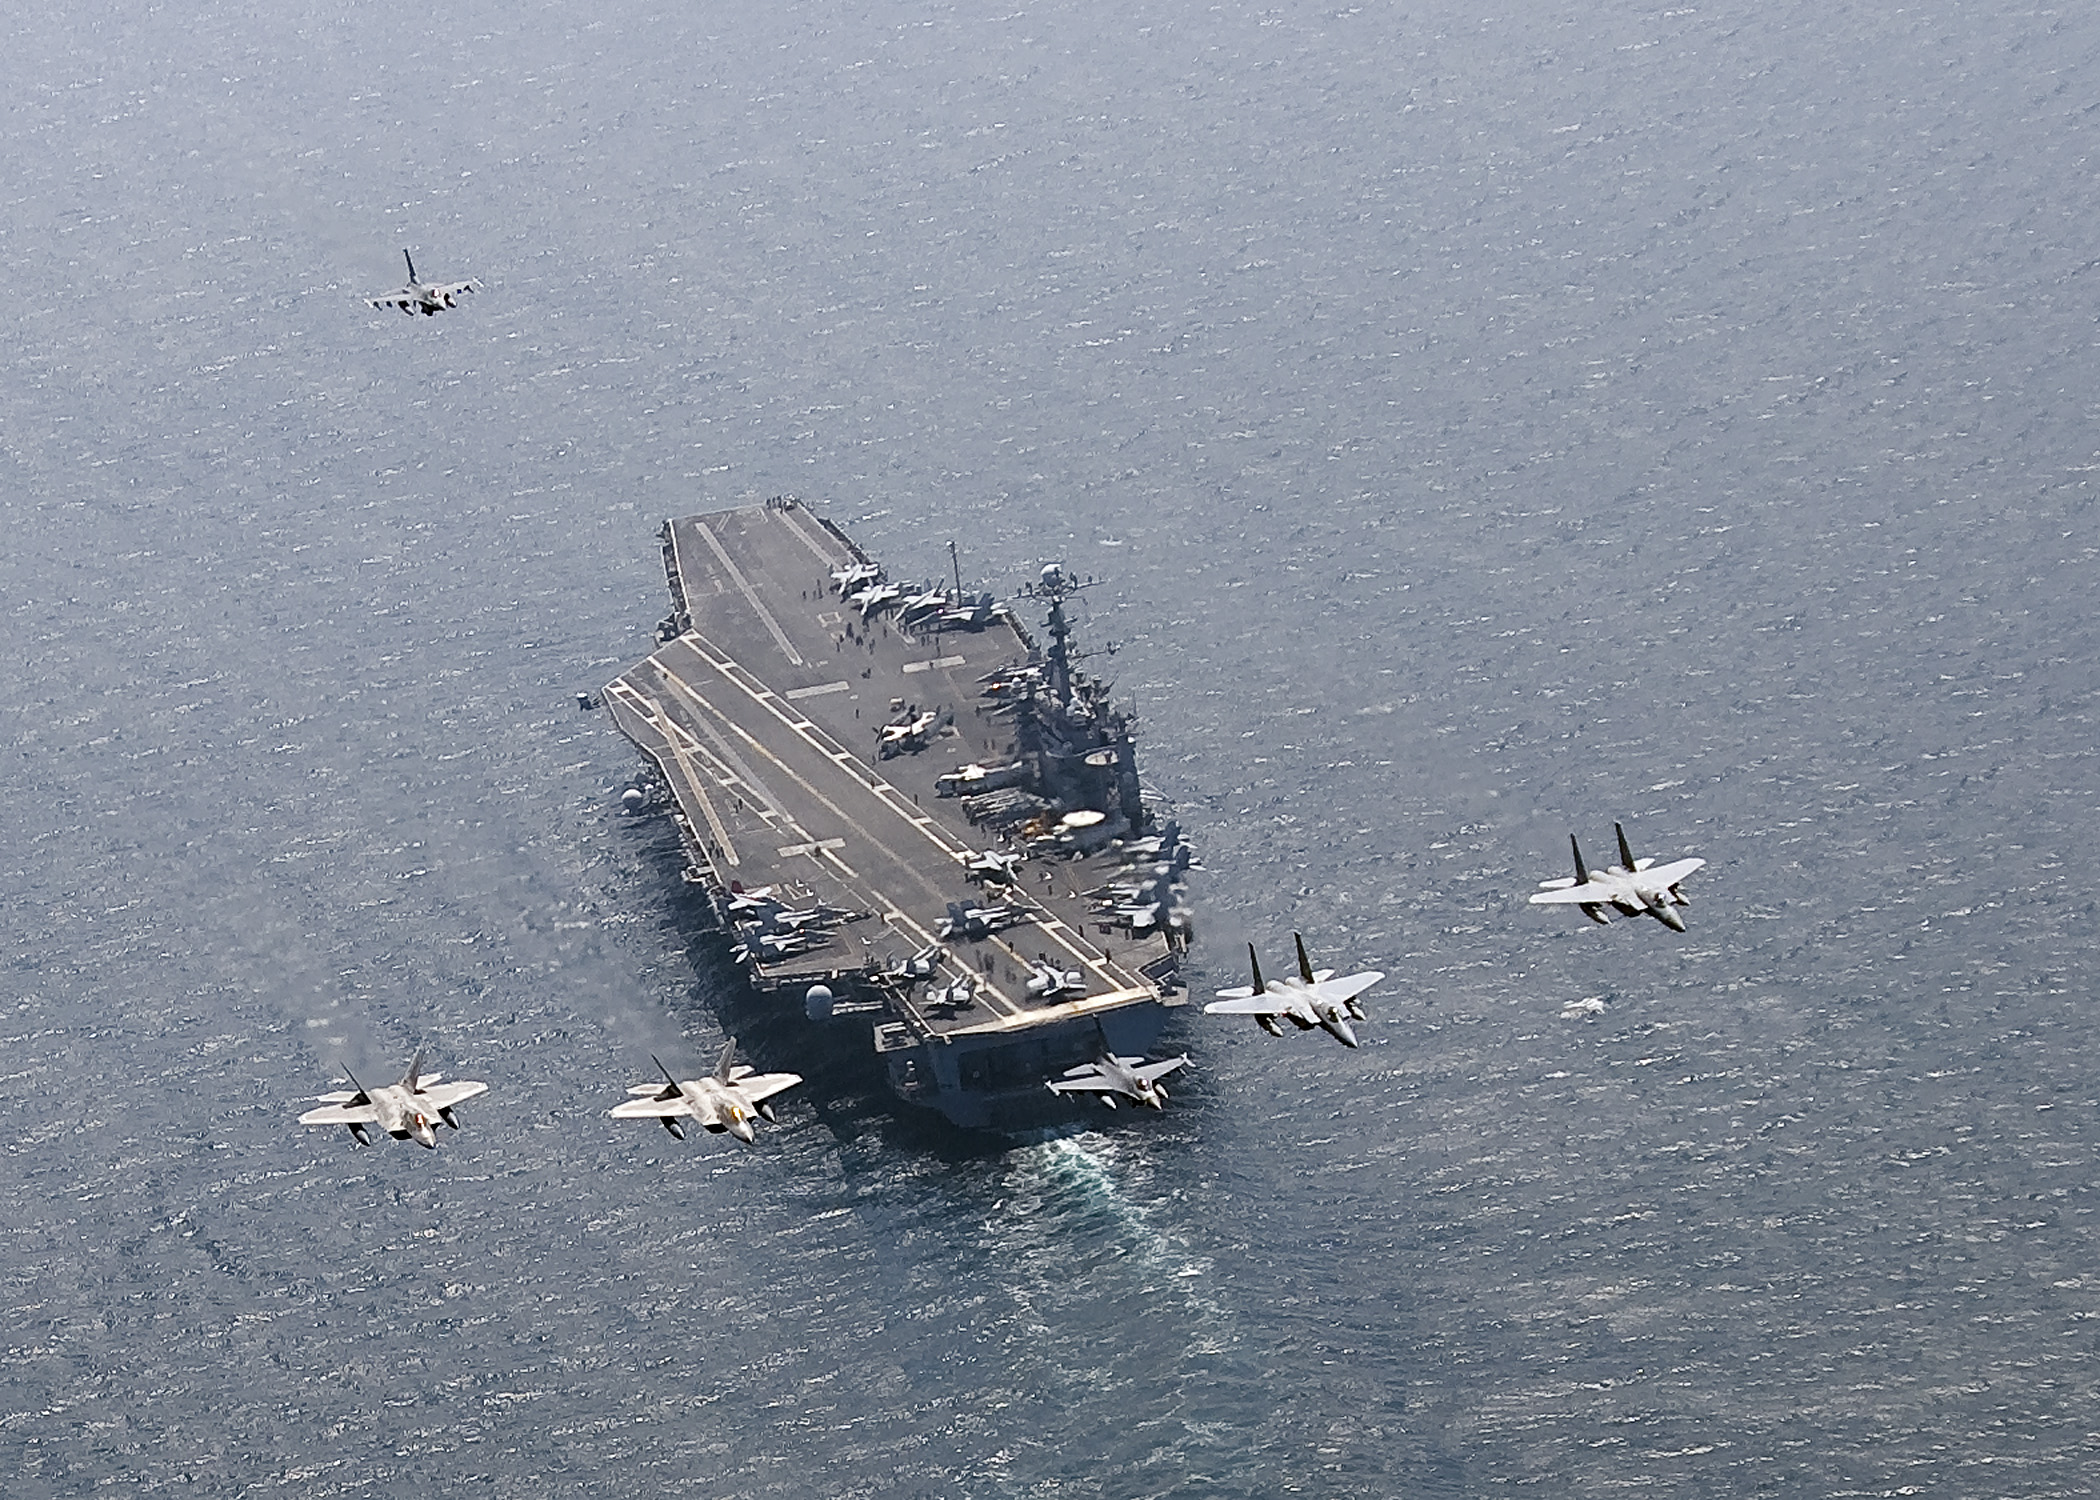 A U.S. Air Force F-16C Fighting Falcon leads a formation of F-15 Eagles and F-22 Raptors as they fly in formation over aircraft carrier USS George Washington (CVN 73) sailing through the Sea of Japan in July 2010. US Navy photo.